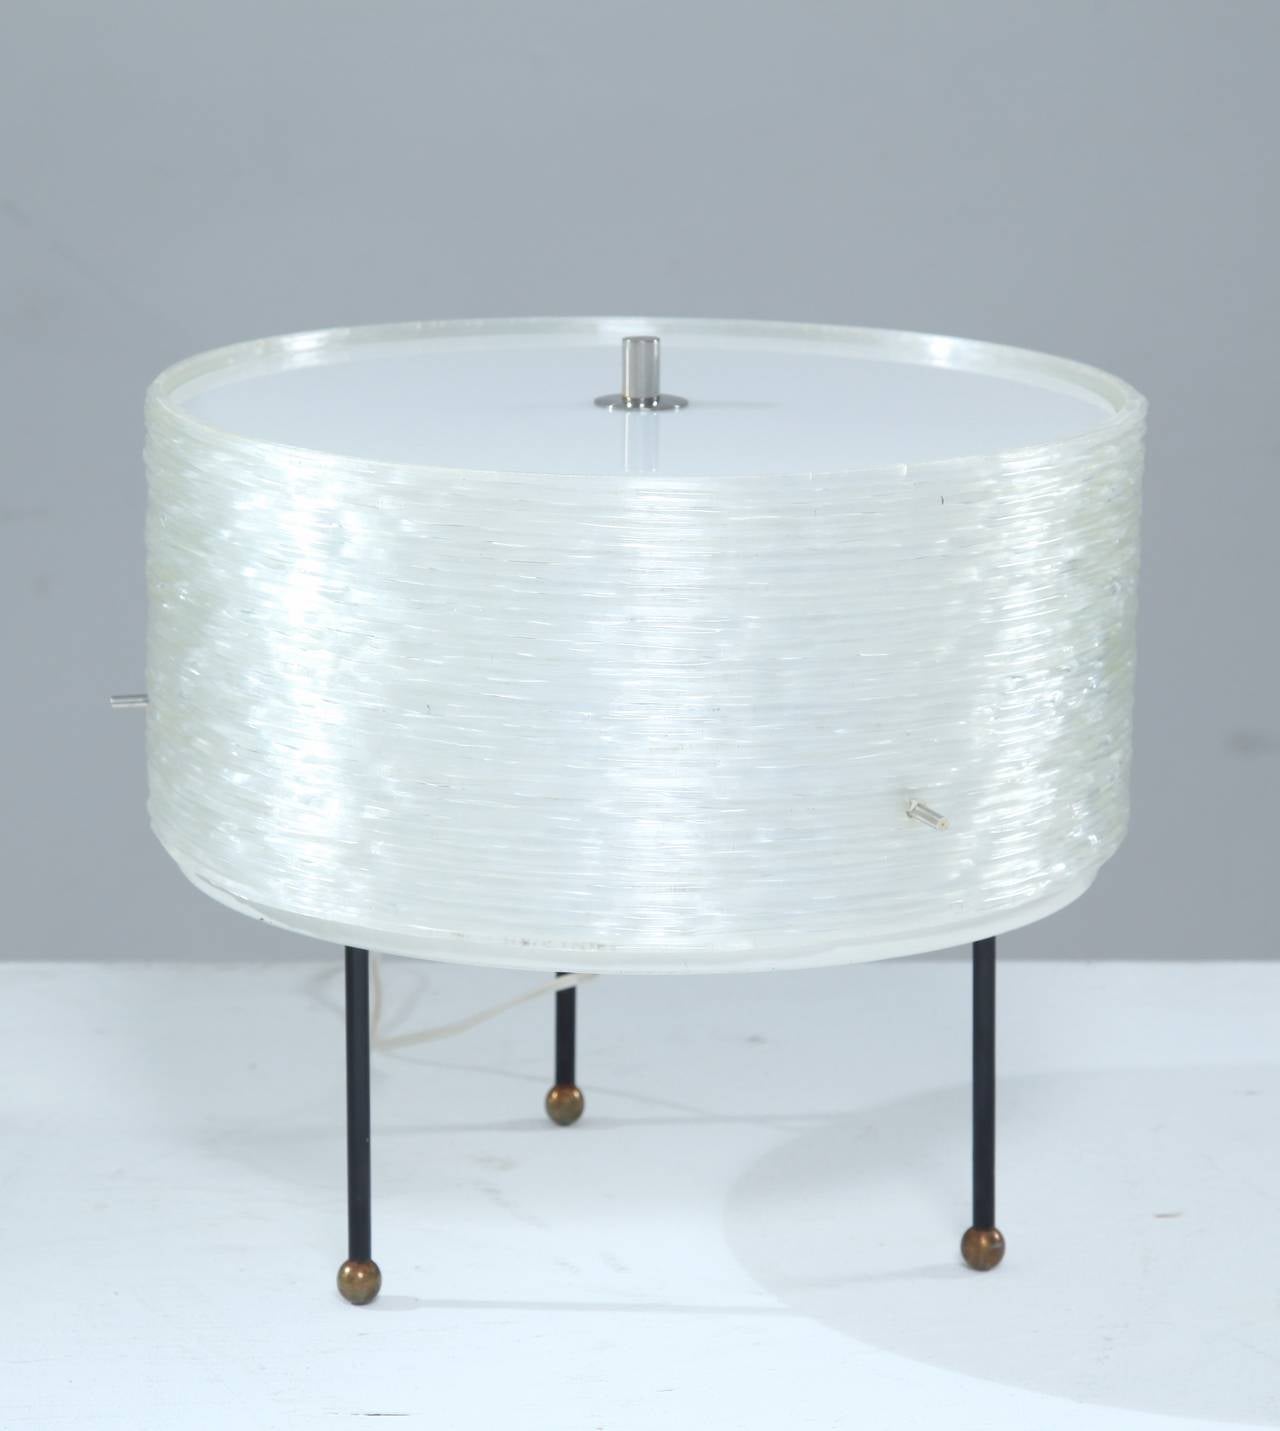 French Round Perspex Table Lamp by Arlus, France, 1950s For Sale